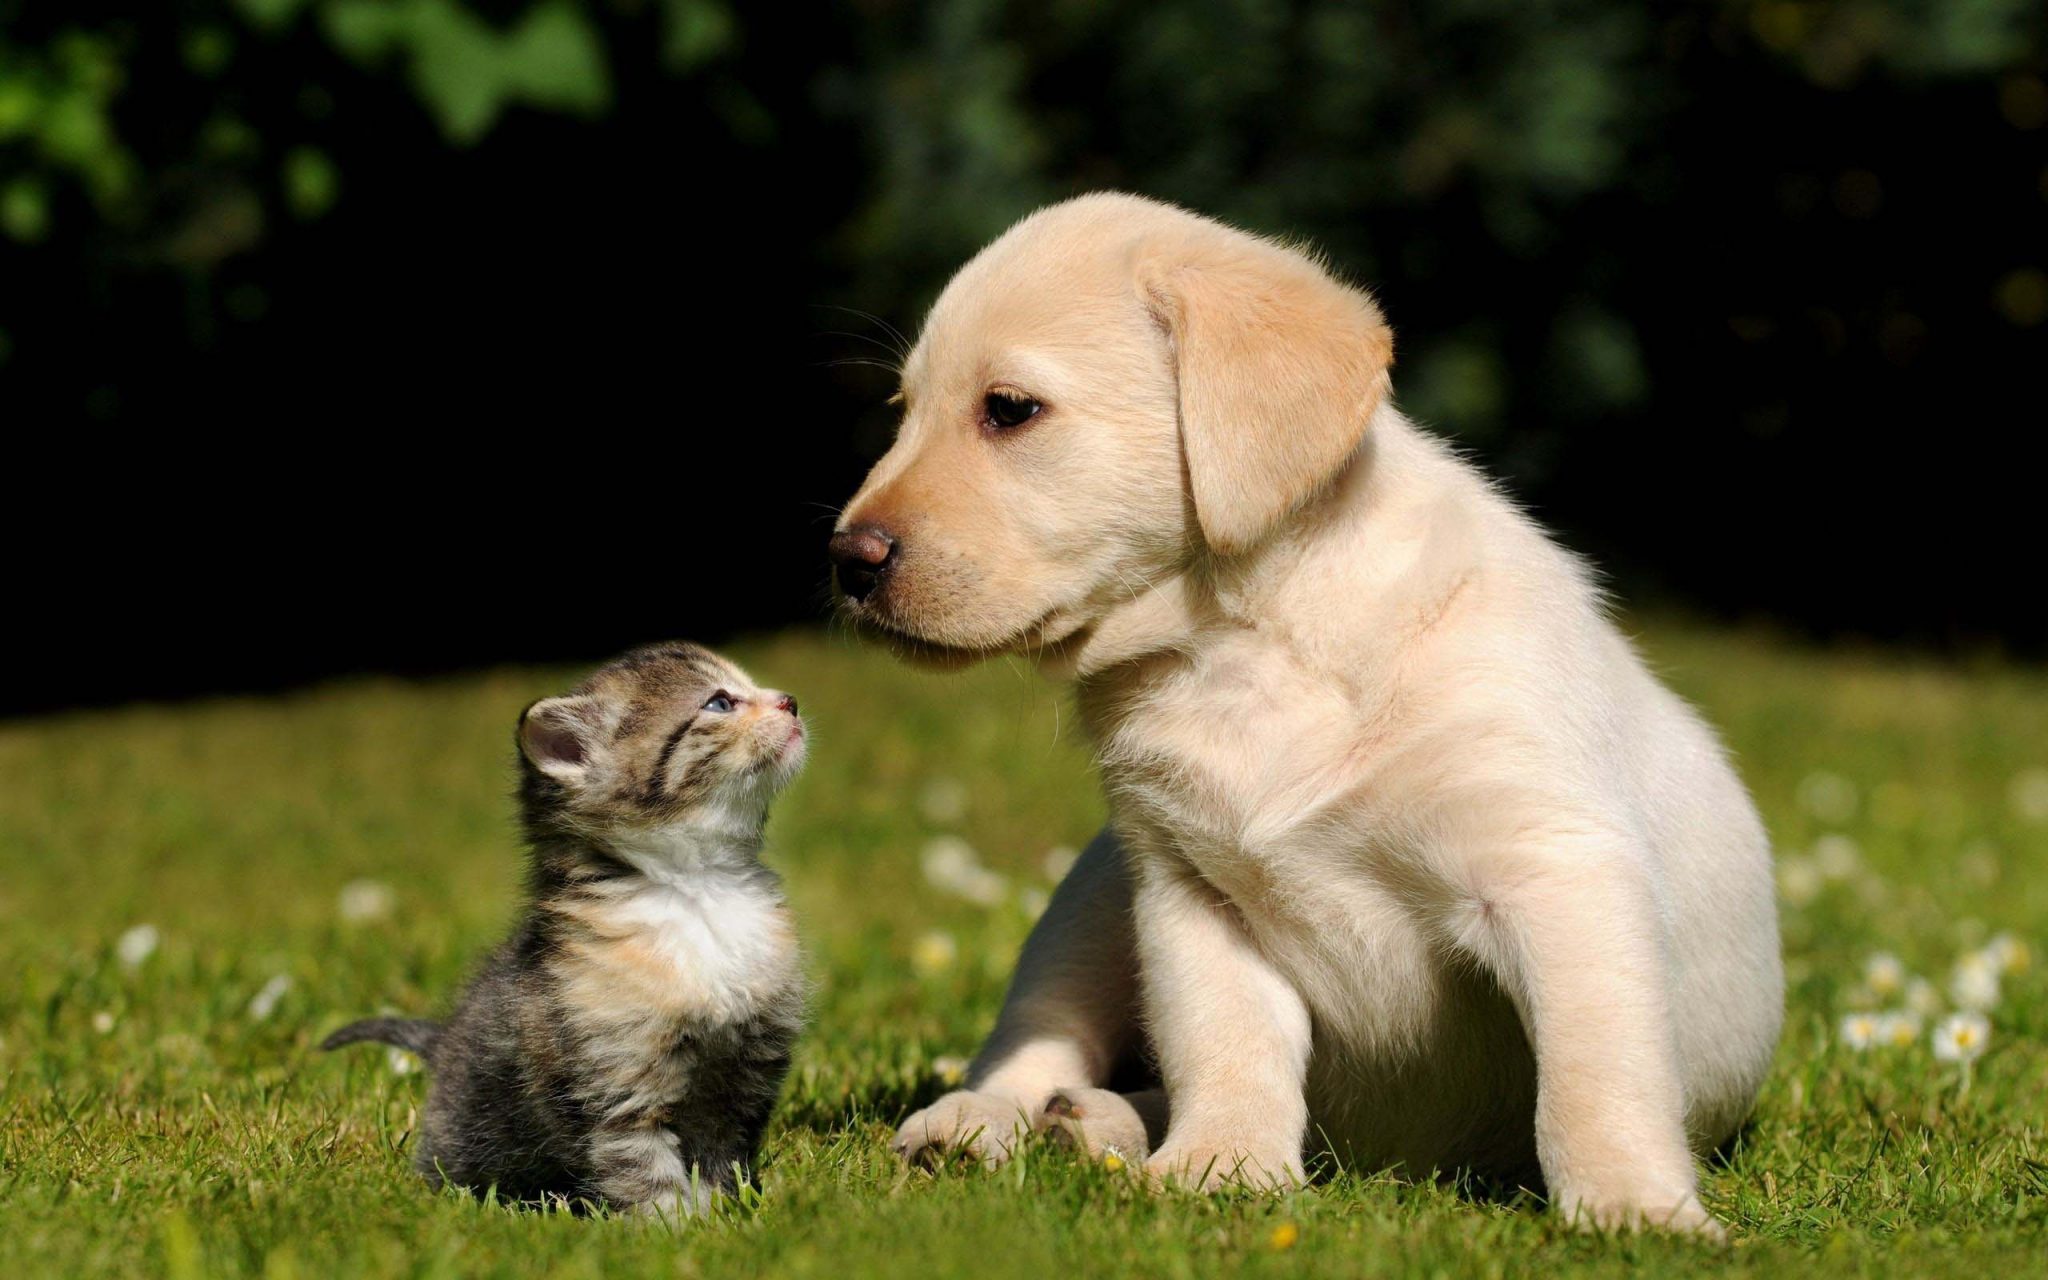 Cute-cat-and-dog-wallpaper-background-hd-09